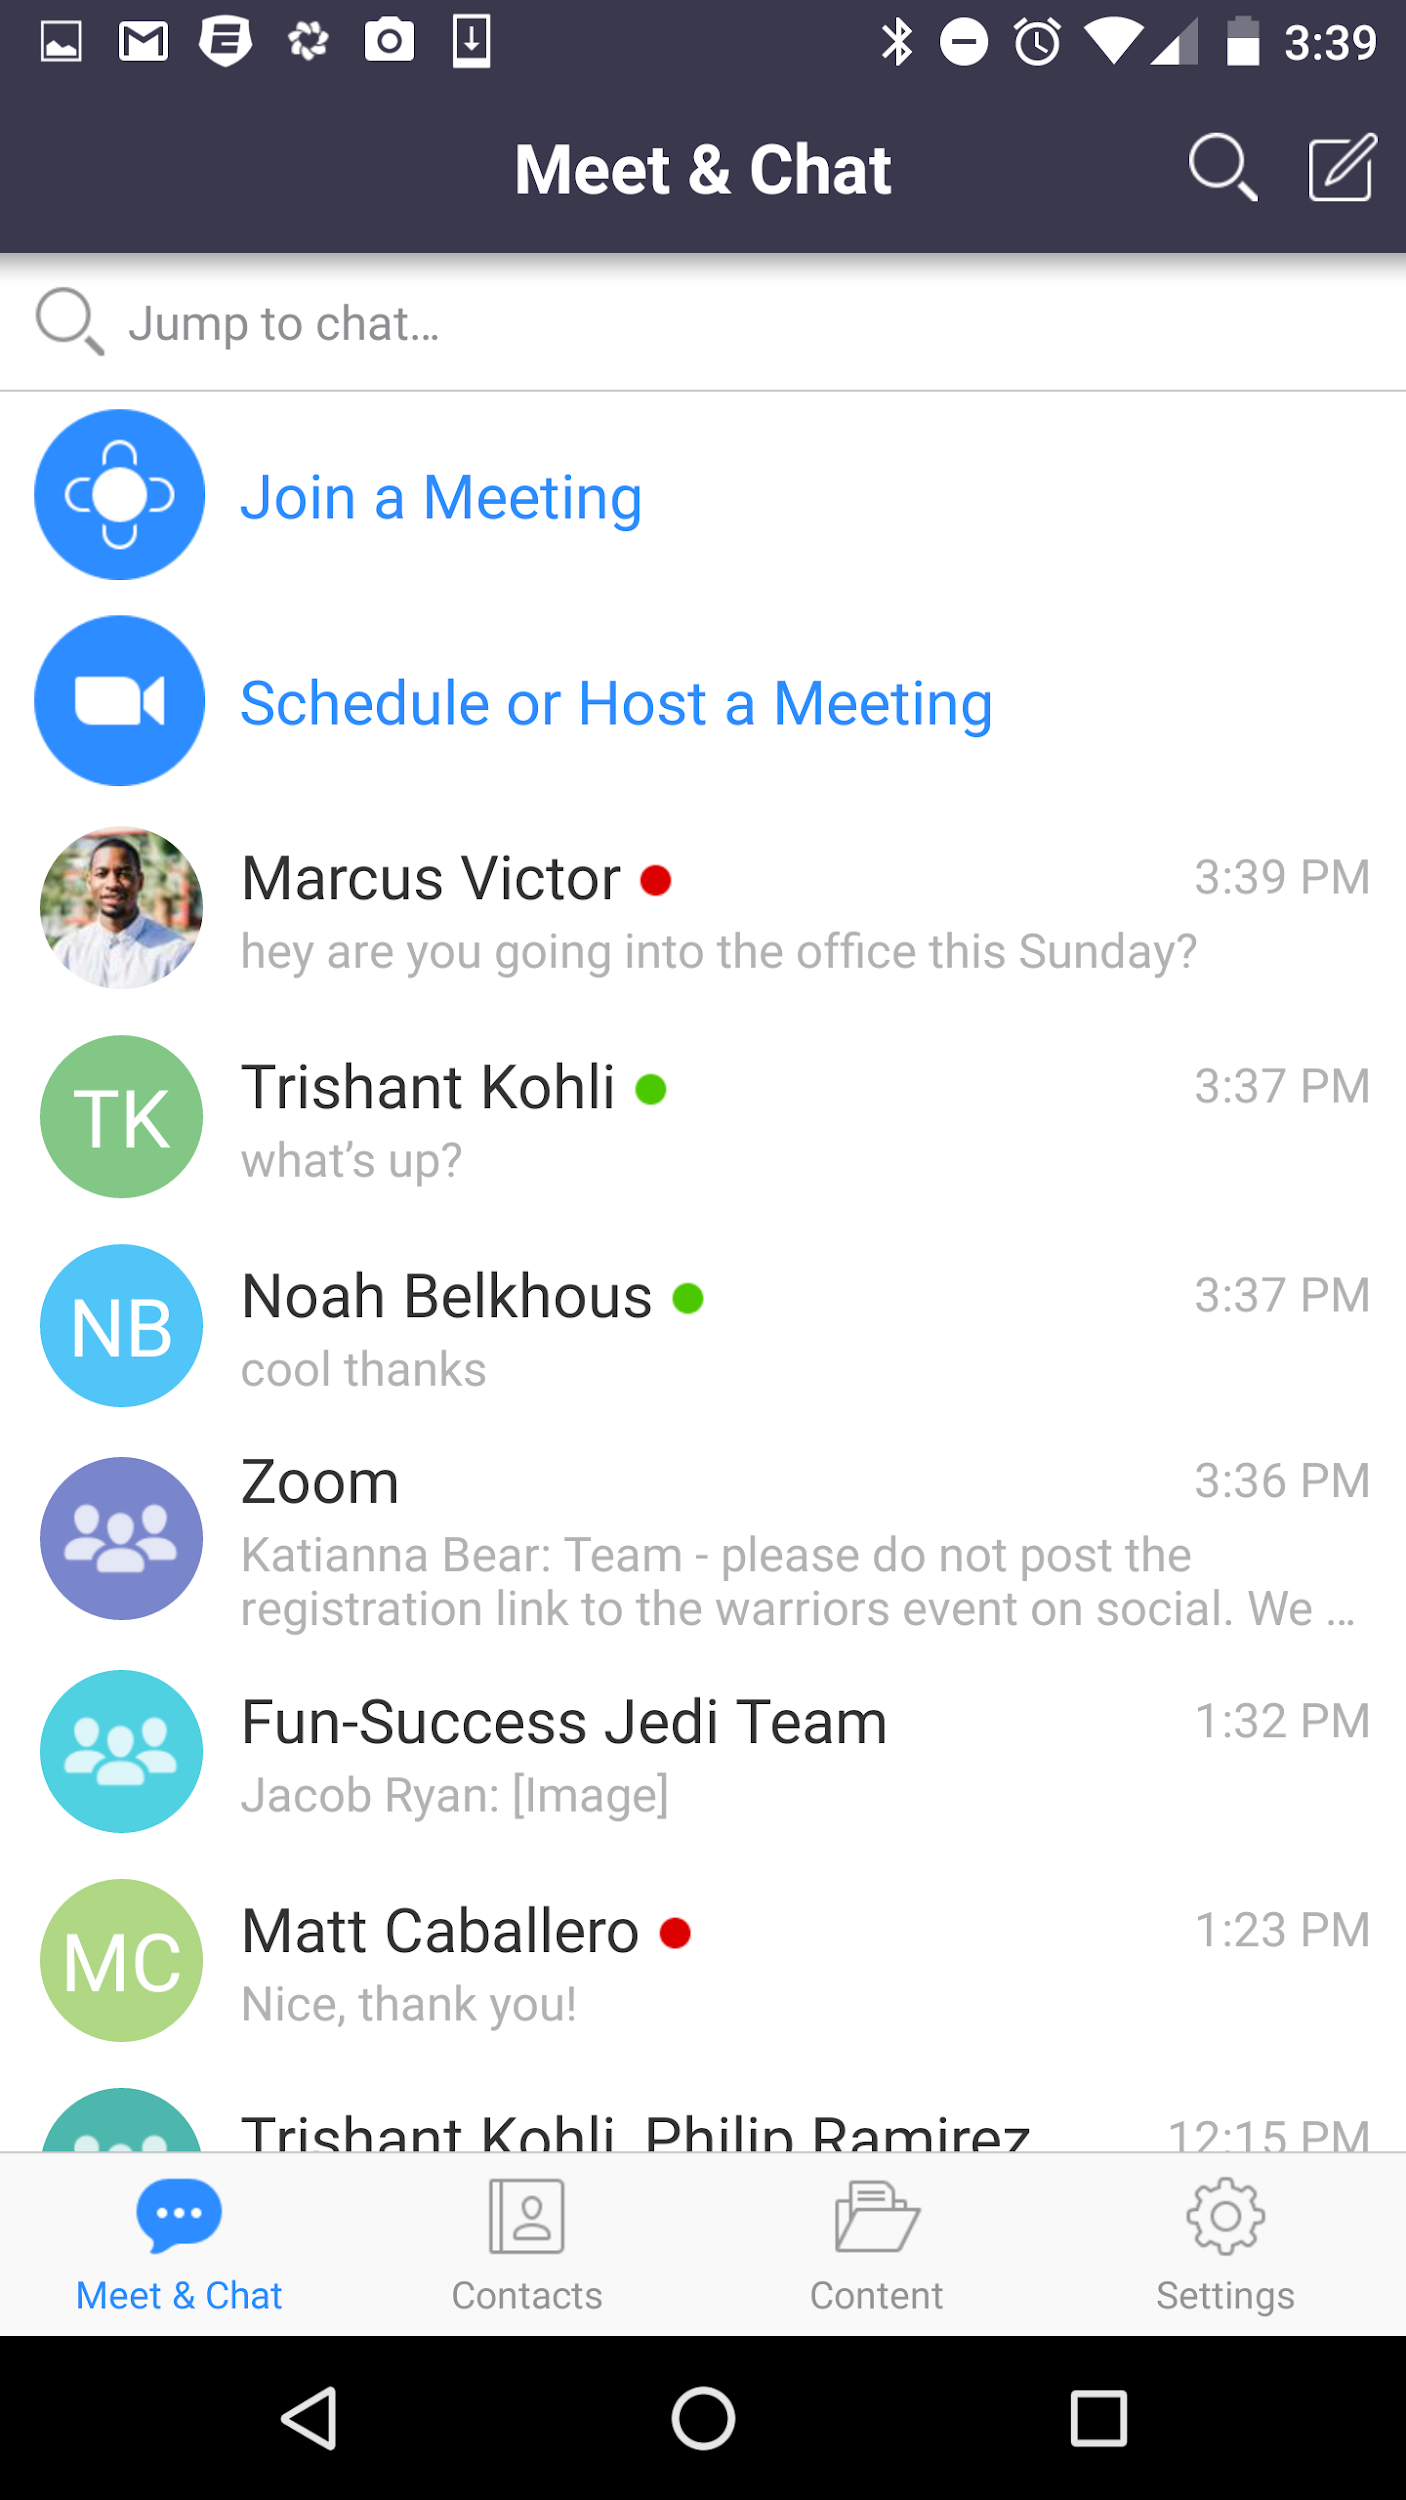 Zoom-meet-and-chat-mobile-app-view-